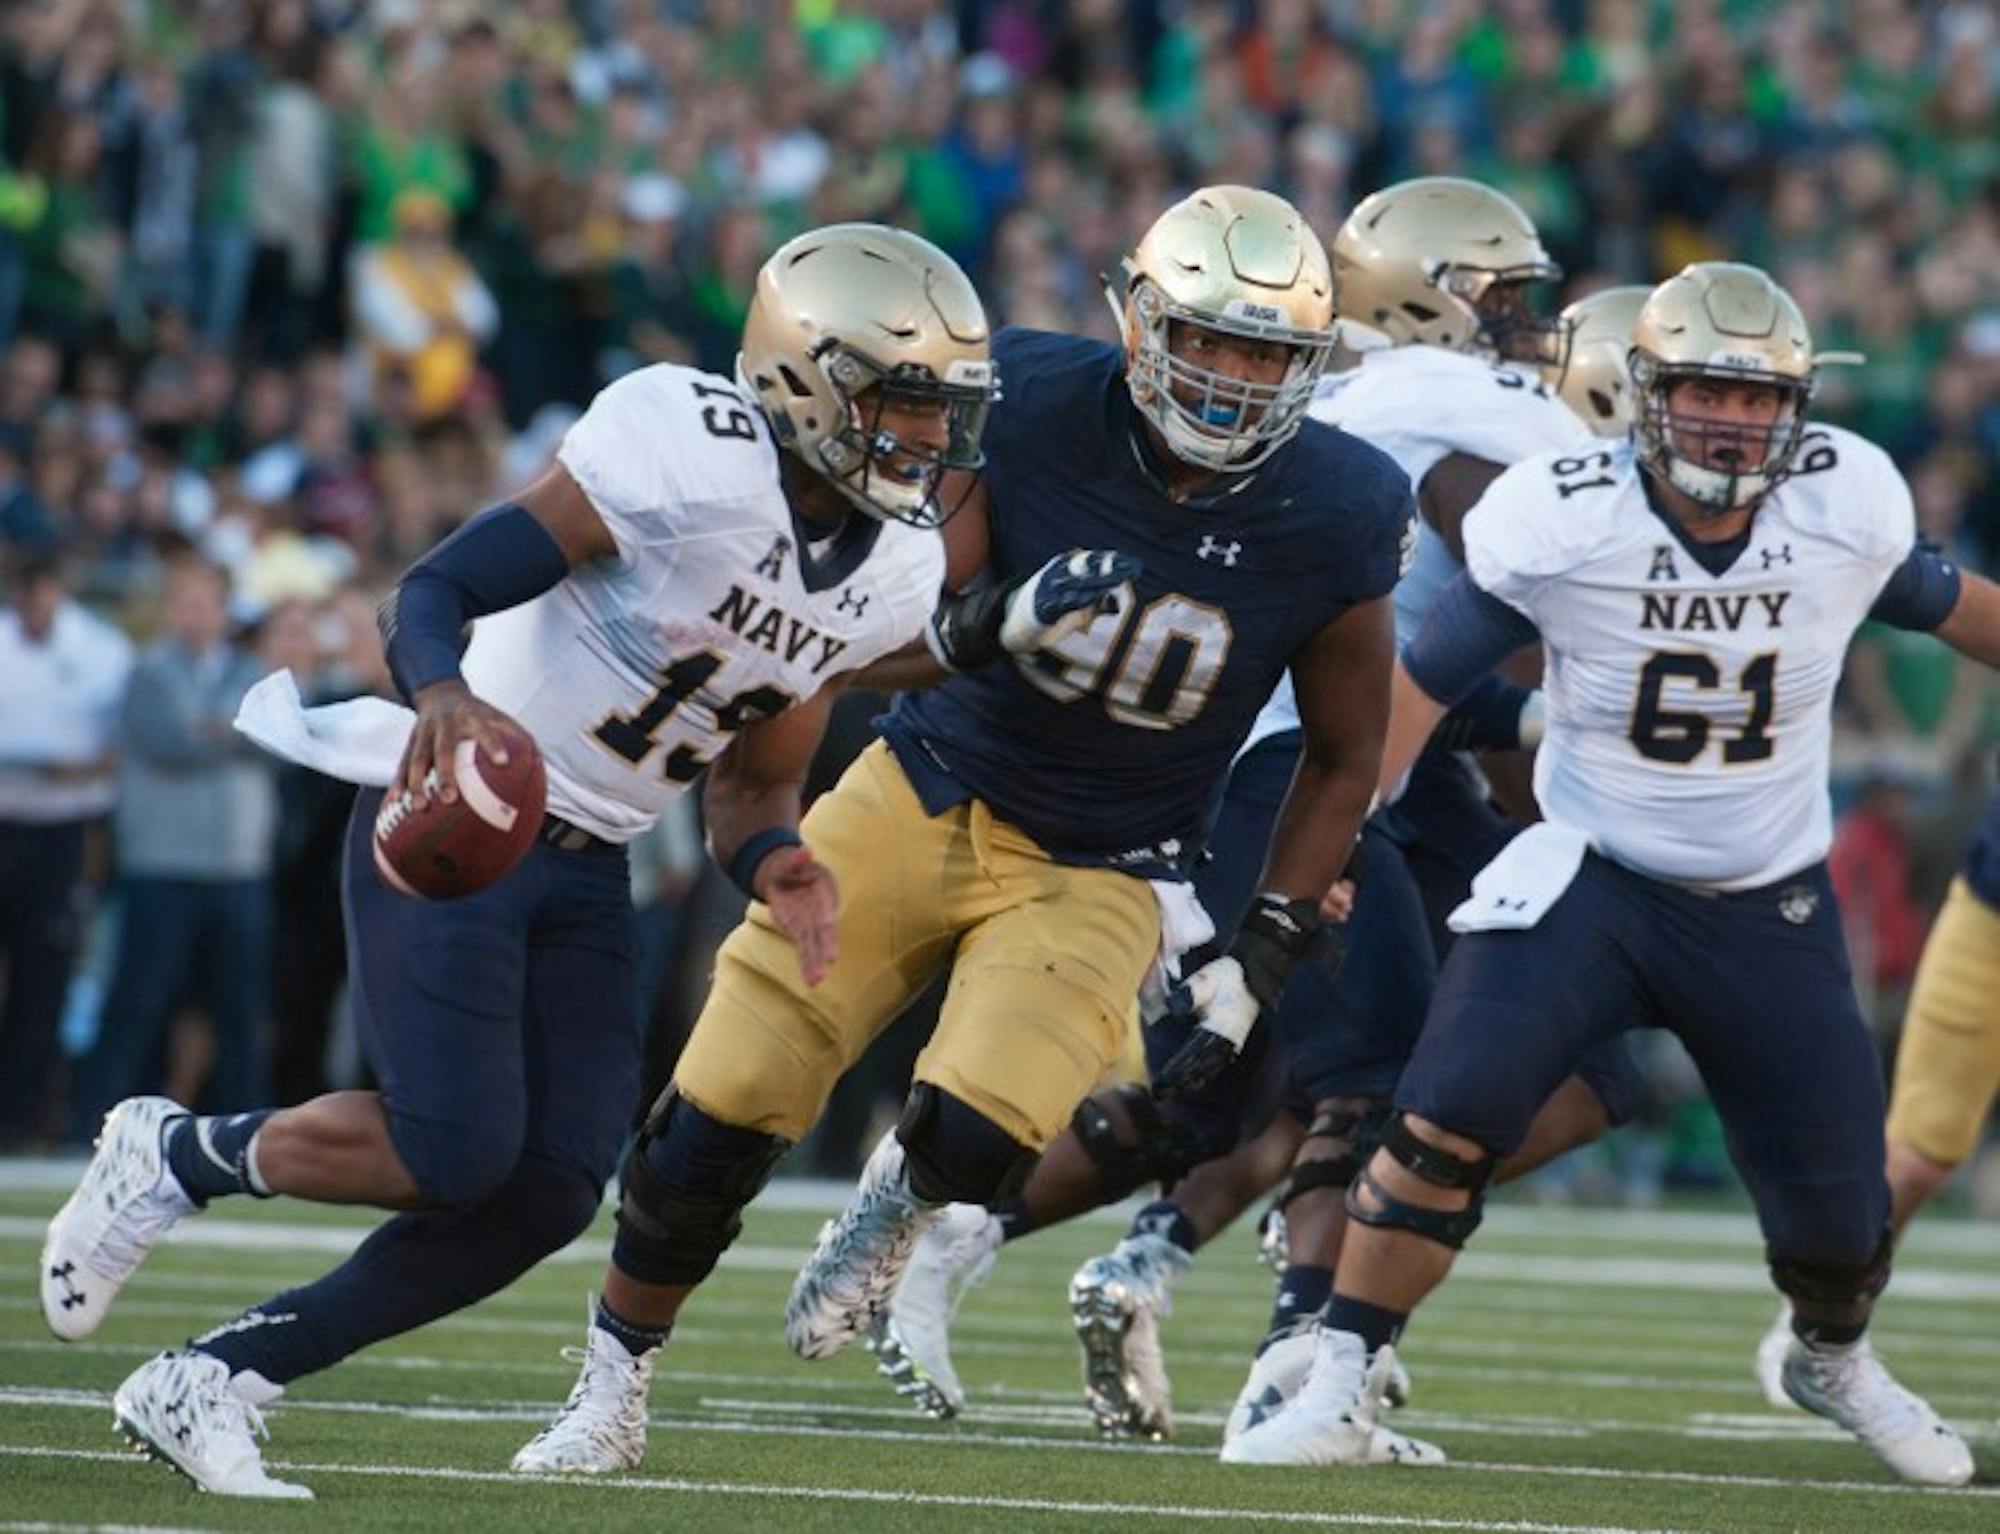 Irish senior defensive lineman Isaac Rochell chases after Navy senior quarterback Keenan Reynolds. Rochell recorded six tackles on the day, including one for a loss.